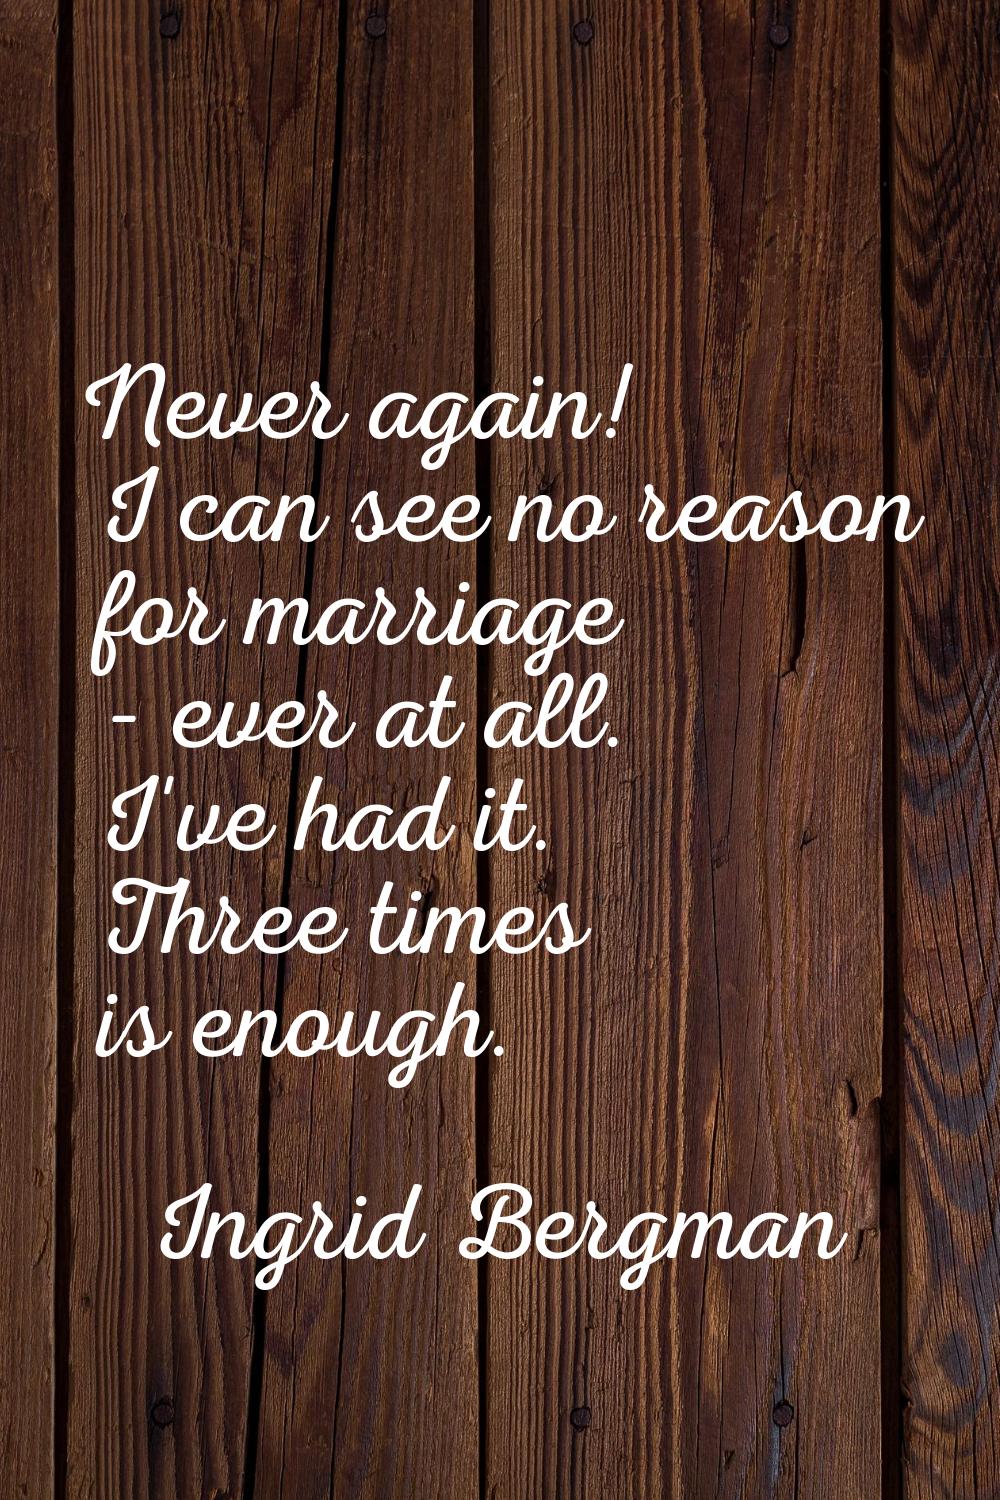 Never again! I can see no reason for marriage - ever at all. I've had it. Three times is enough.